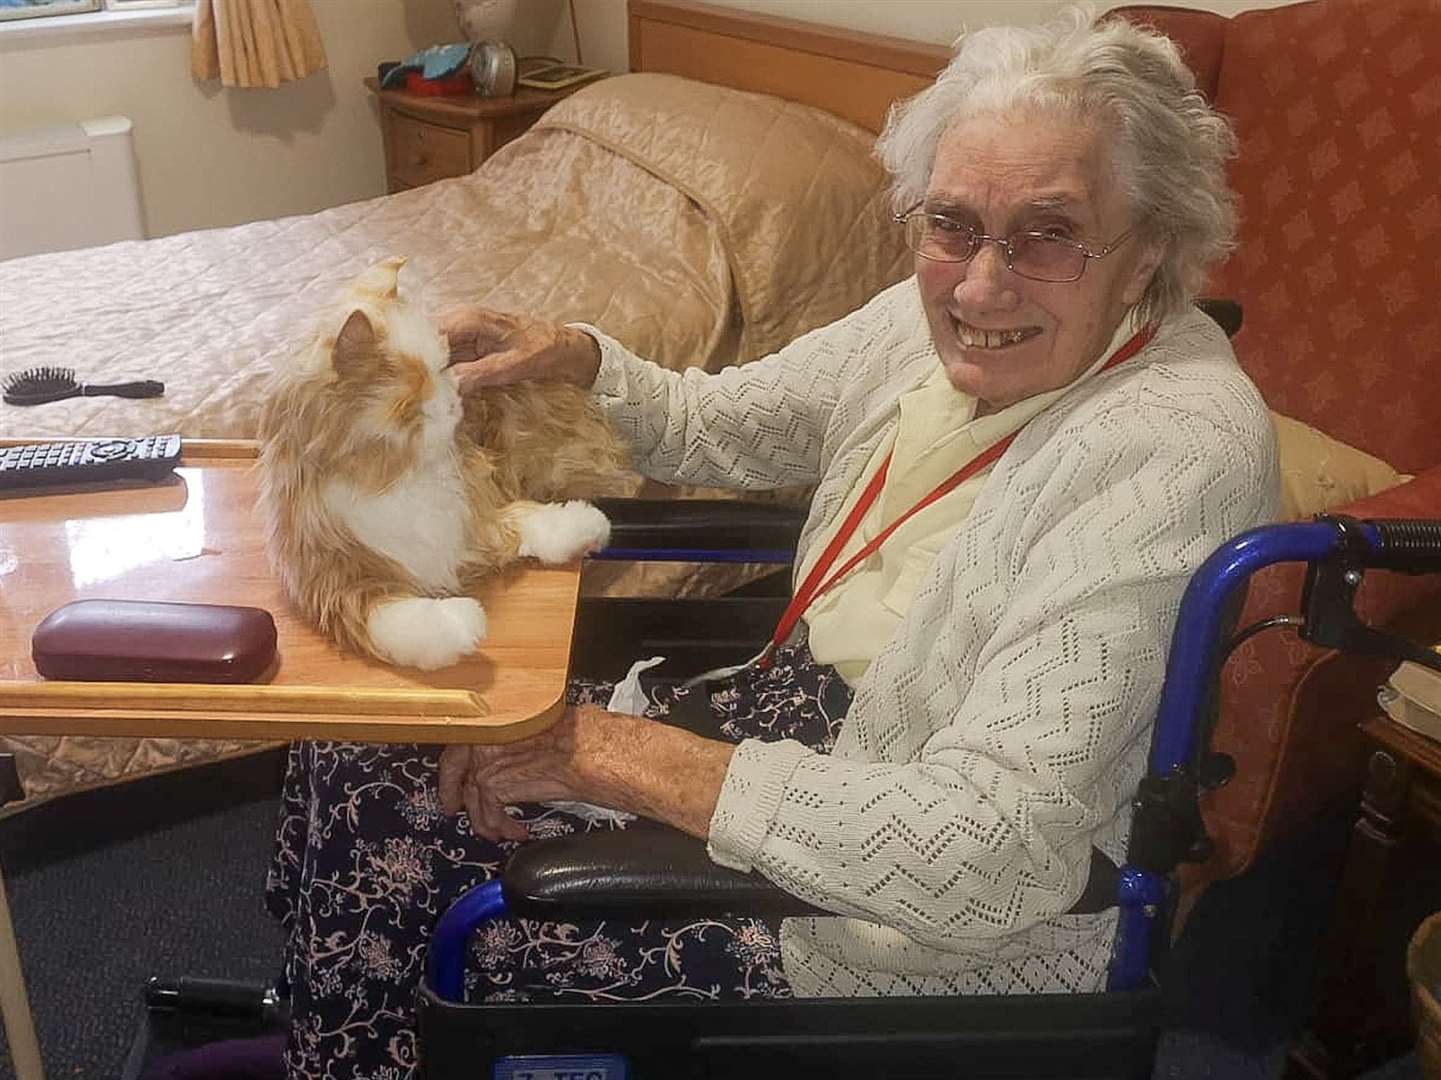 Hythe View care home in Hythe has introduced robotic pets to bring comfort to its residents during the Covid-19 outbreak. Pictured is Beatrice with Simba the cat